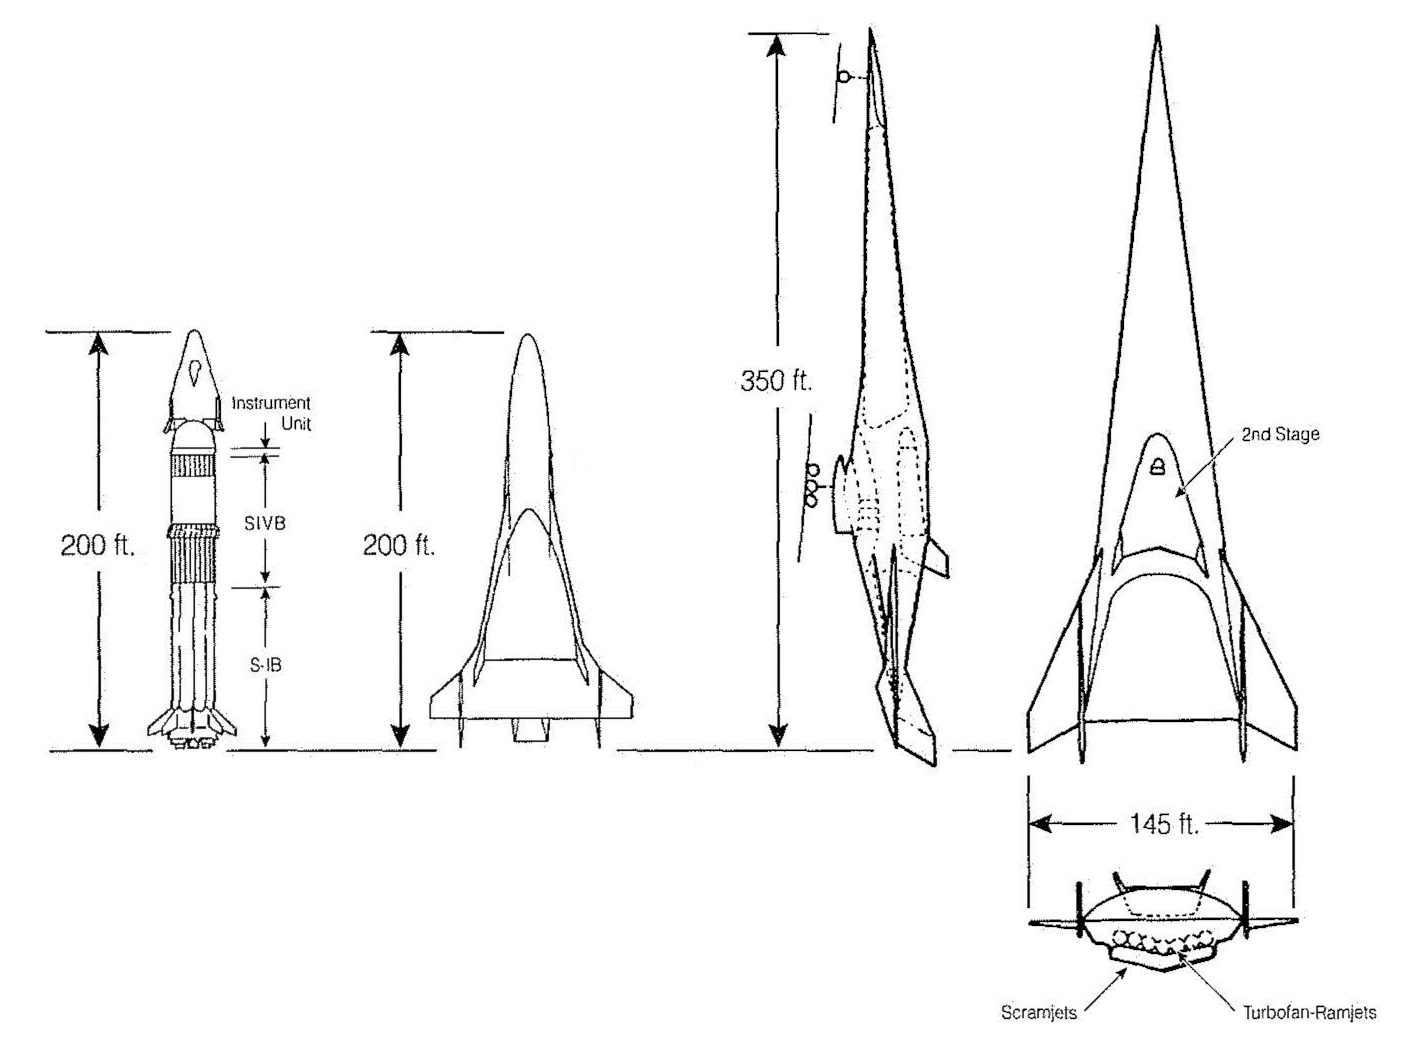 Three different types of spaceplanes studied by the joint NASA-USAF panel in 1965-66 (L-R): Class I, launched atop a Saturn I-B booster; Class II, with two reusable rocket-powered stages; and Class III, with a scramjet-powered first stage. Class III is shown on the right in a three-view. (Source: USAF illustration printed in Heppenheimer, The Space Shuttle Decision, p. 83)